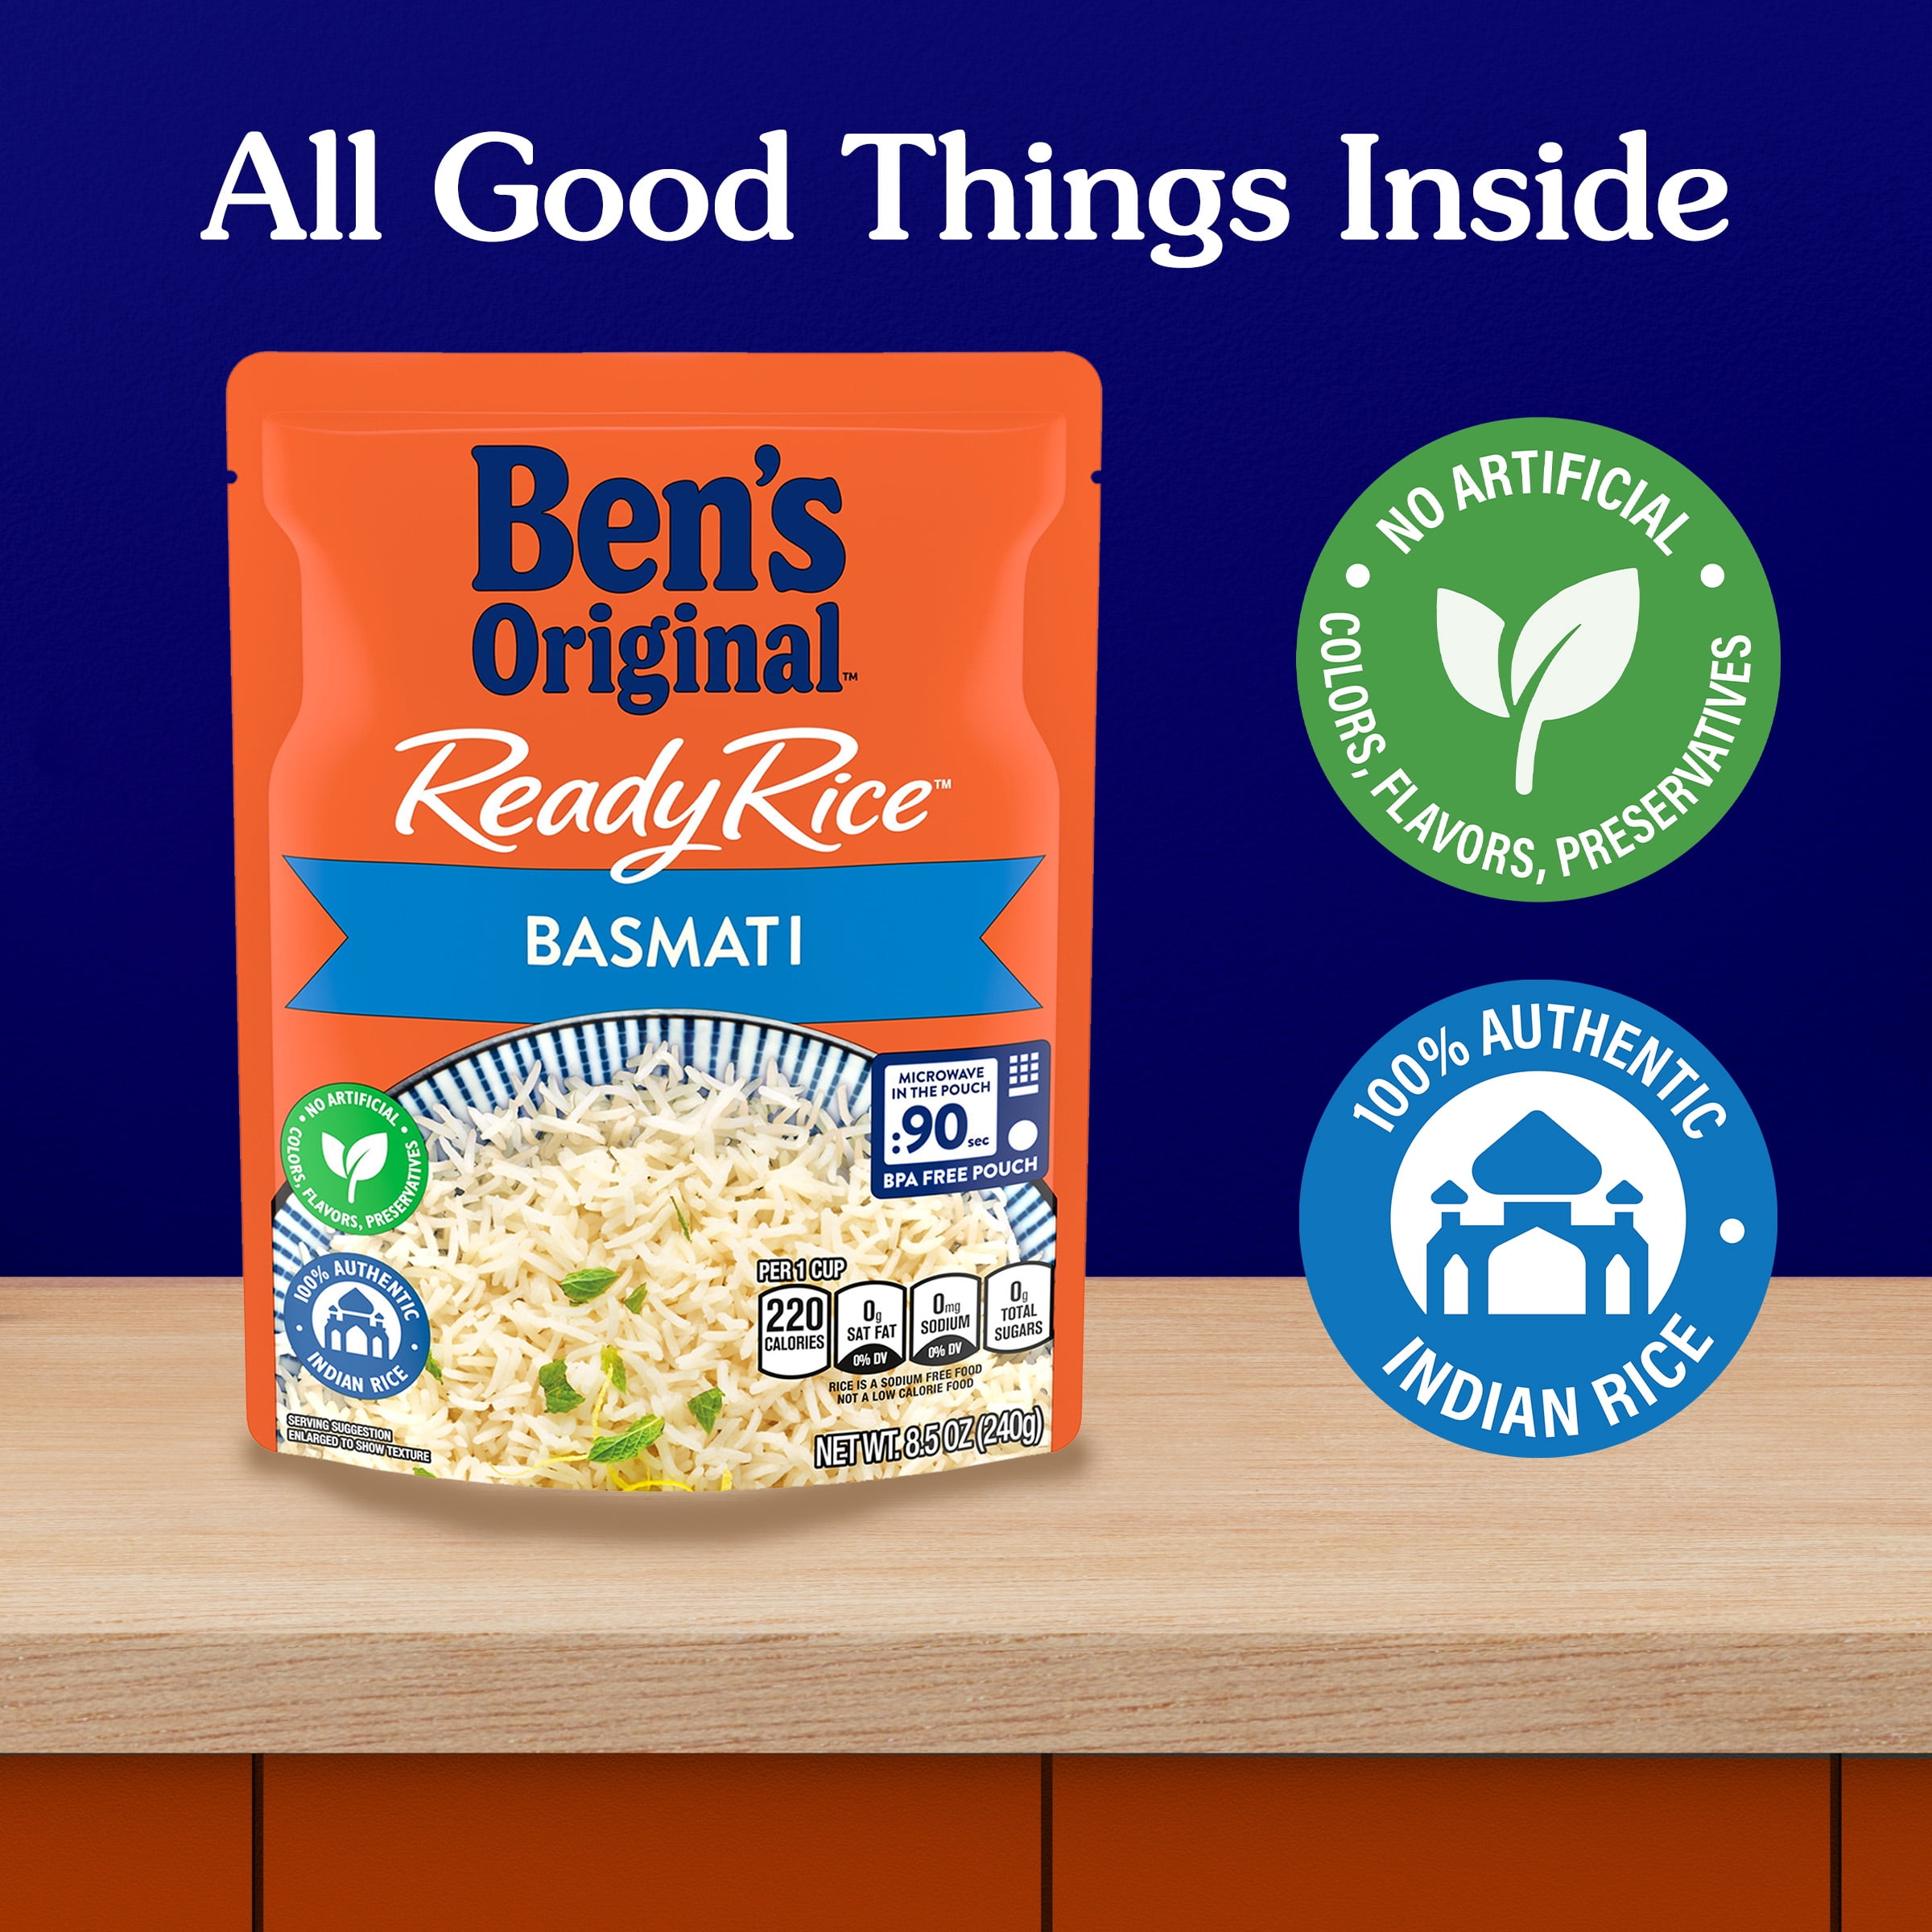 Uncle Ben's Bistro Express Bismati Rice reviews in Packaged Side Dishes -  ChickAdvisor